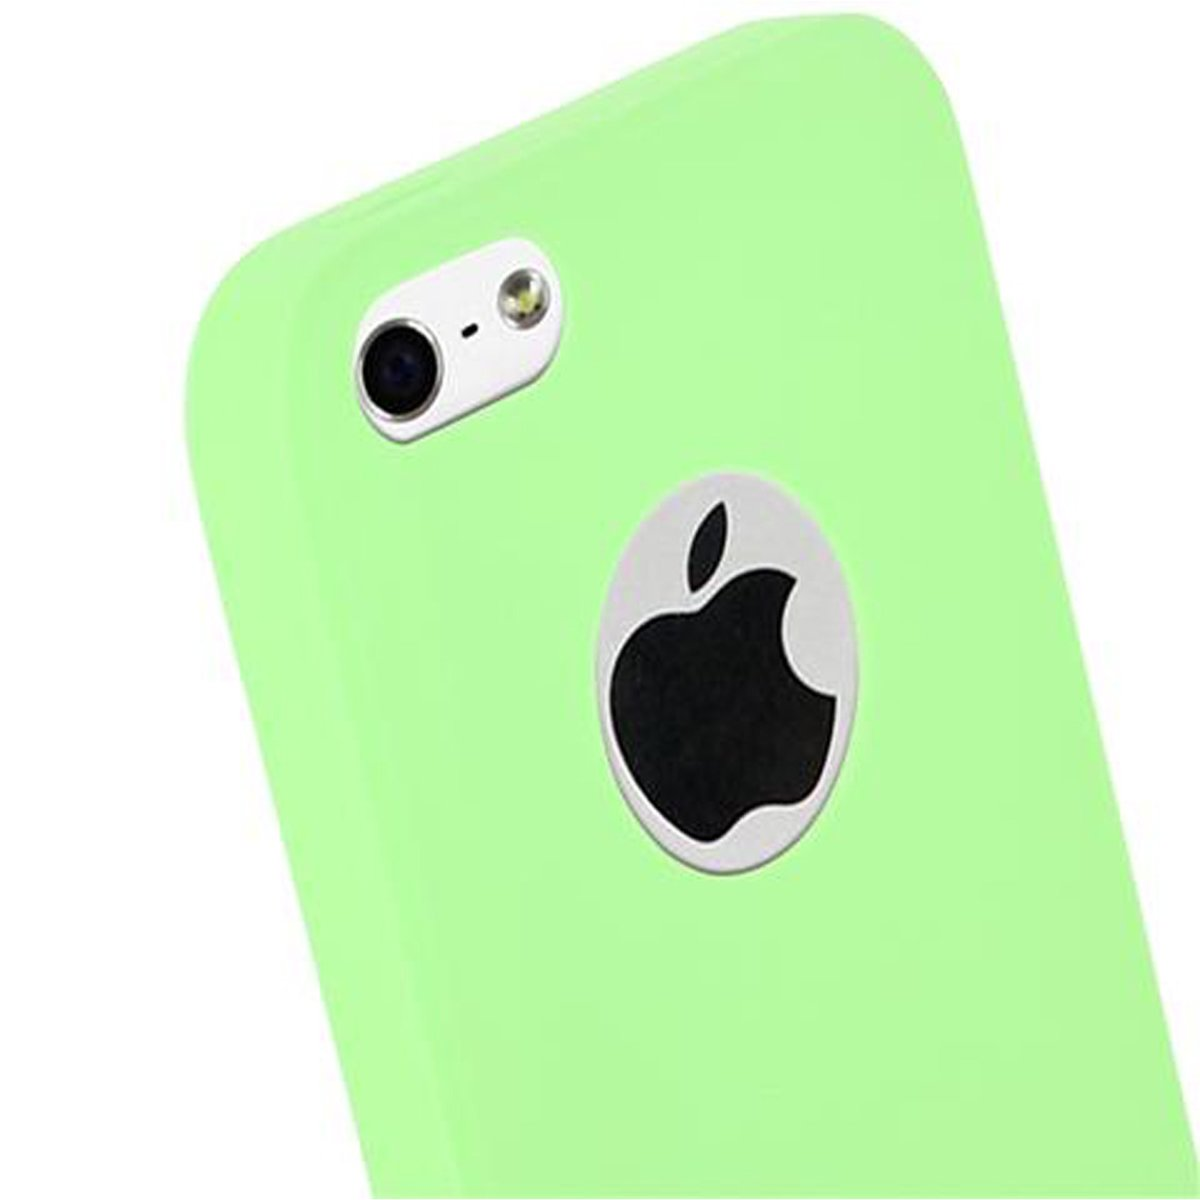 TPU GRÜN 2016, CADORABO im / Candy CANDY Apple, 5S iPhone PASTELL Backcover, / Style, 5 SE Hülle